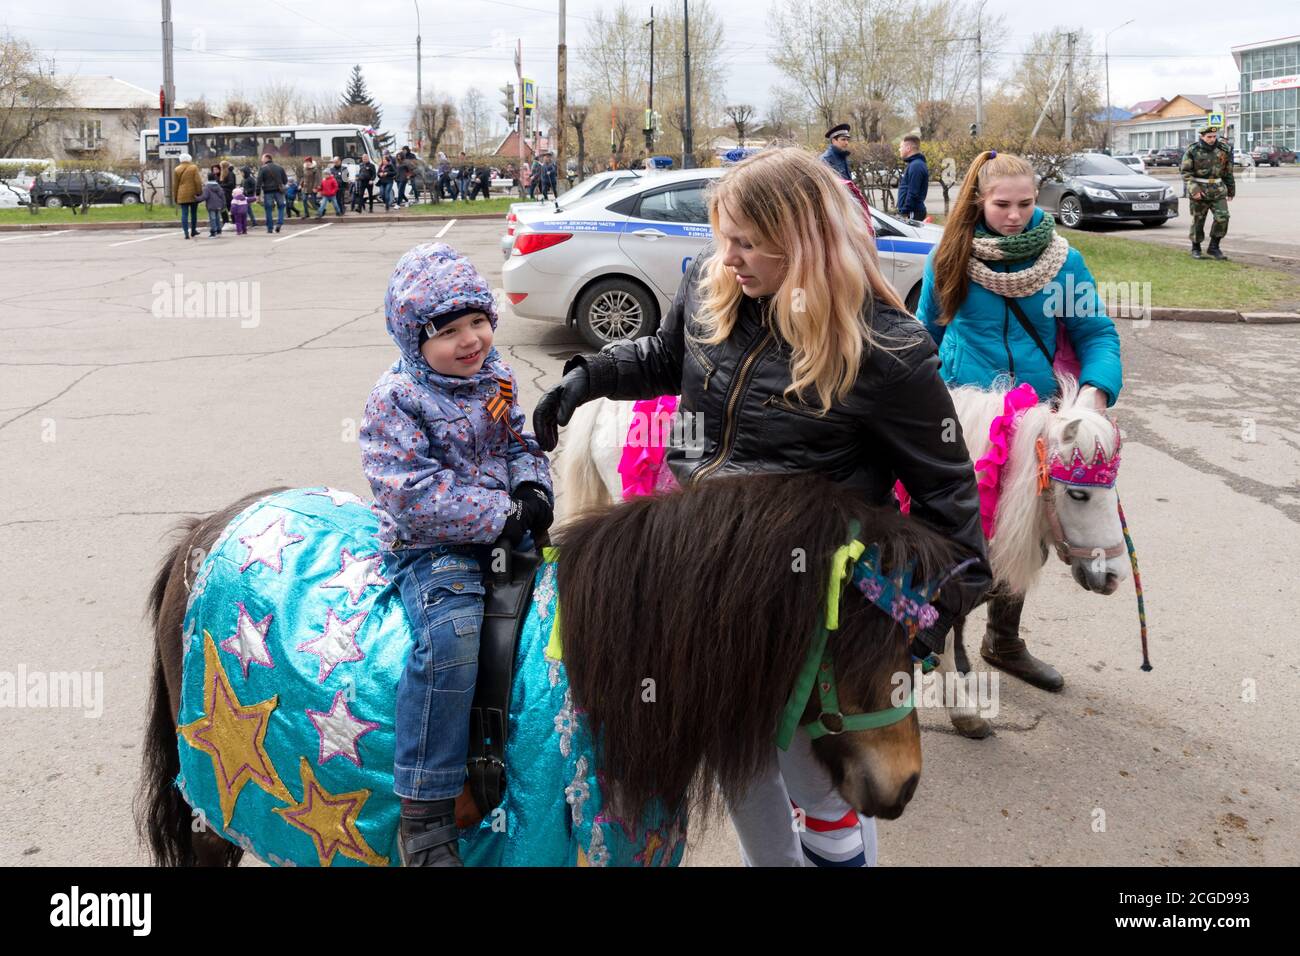 Little boy sits on a pony, a girl is standing next to her, against the background of a police car during the celebration of Victory Day WWII. Krasnoya Stock Photo